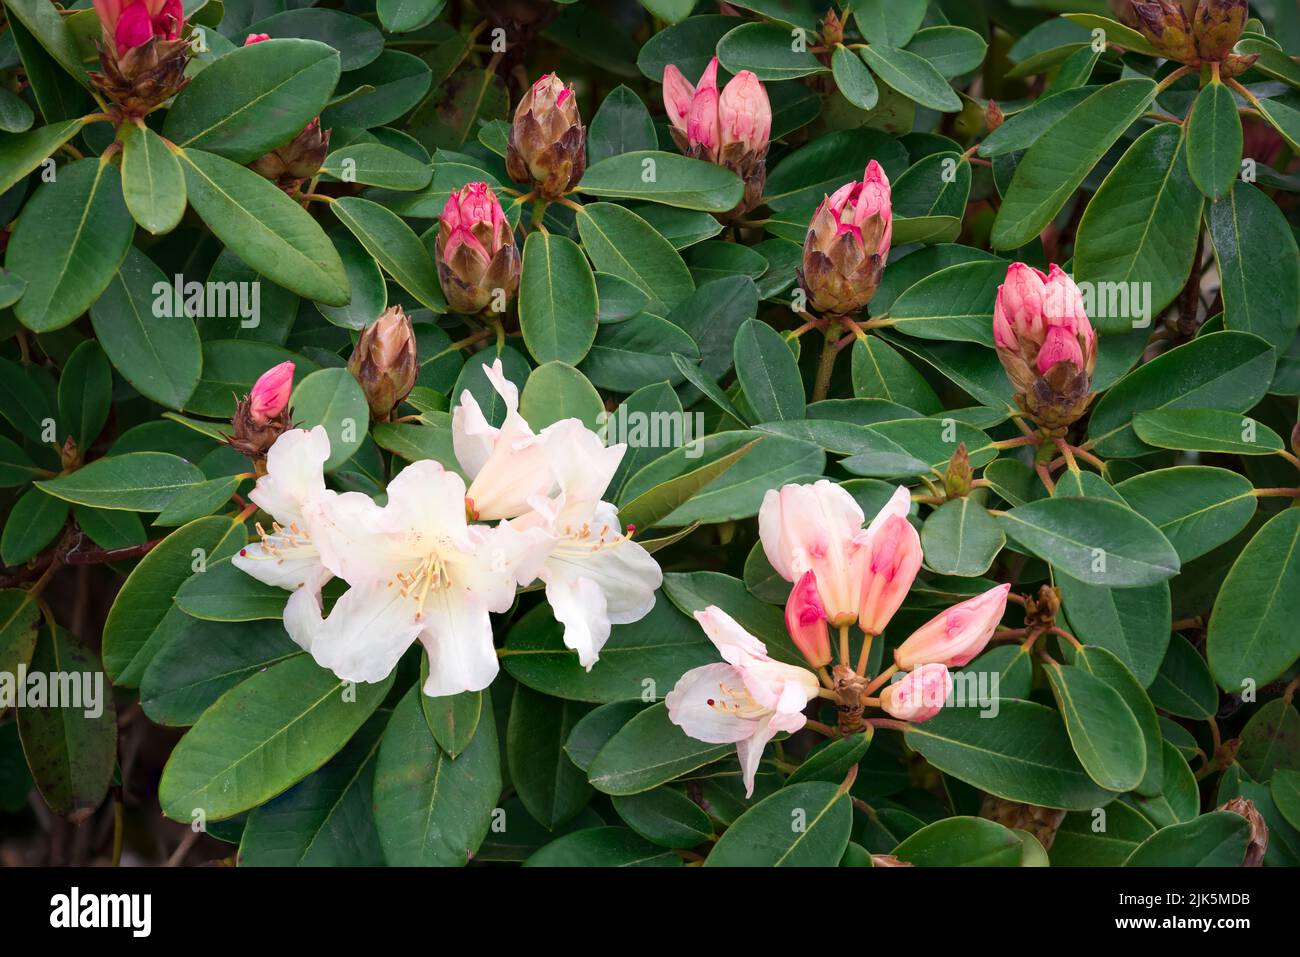 Rhododenderon flowers in a public garden in Abbotsford, British Columbia, Canada. Stock Photo